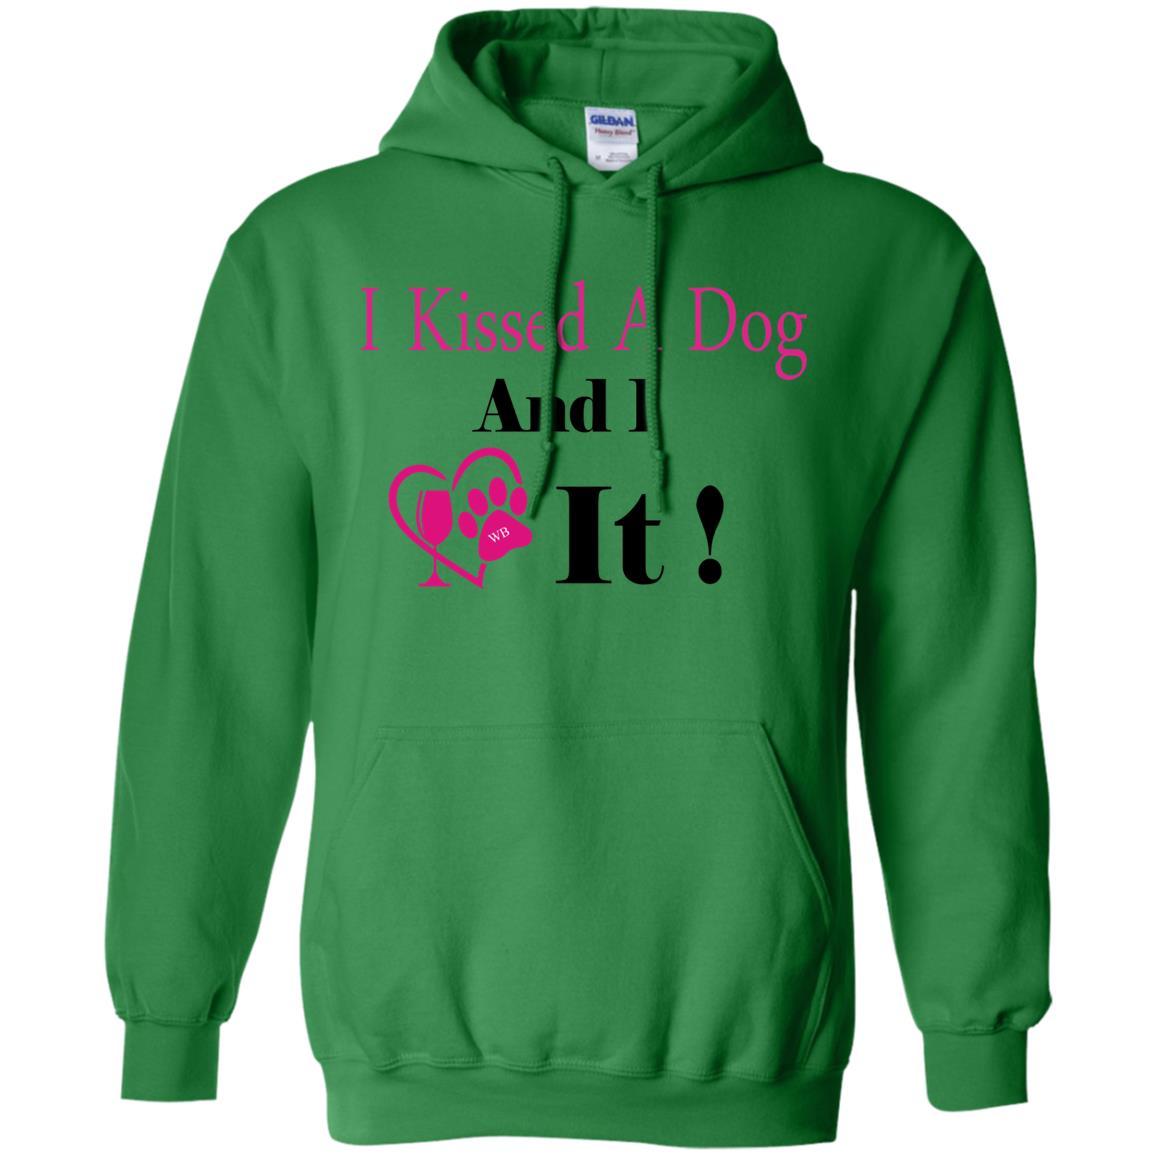 Sweatshirts Irish Green / S WineyBitches.co "I Kissed A Dog And I Loved It:"  Pullover Unisex Hoodie 8 oz. WineyBitchesCo